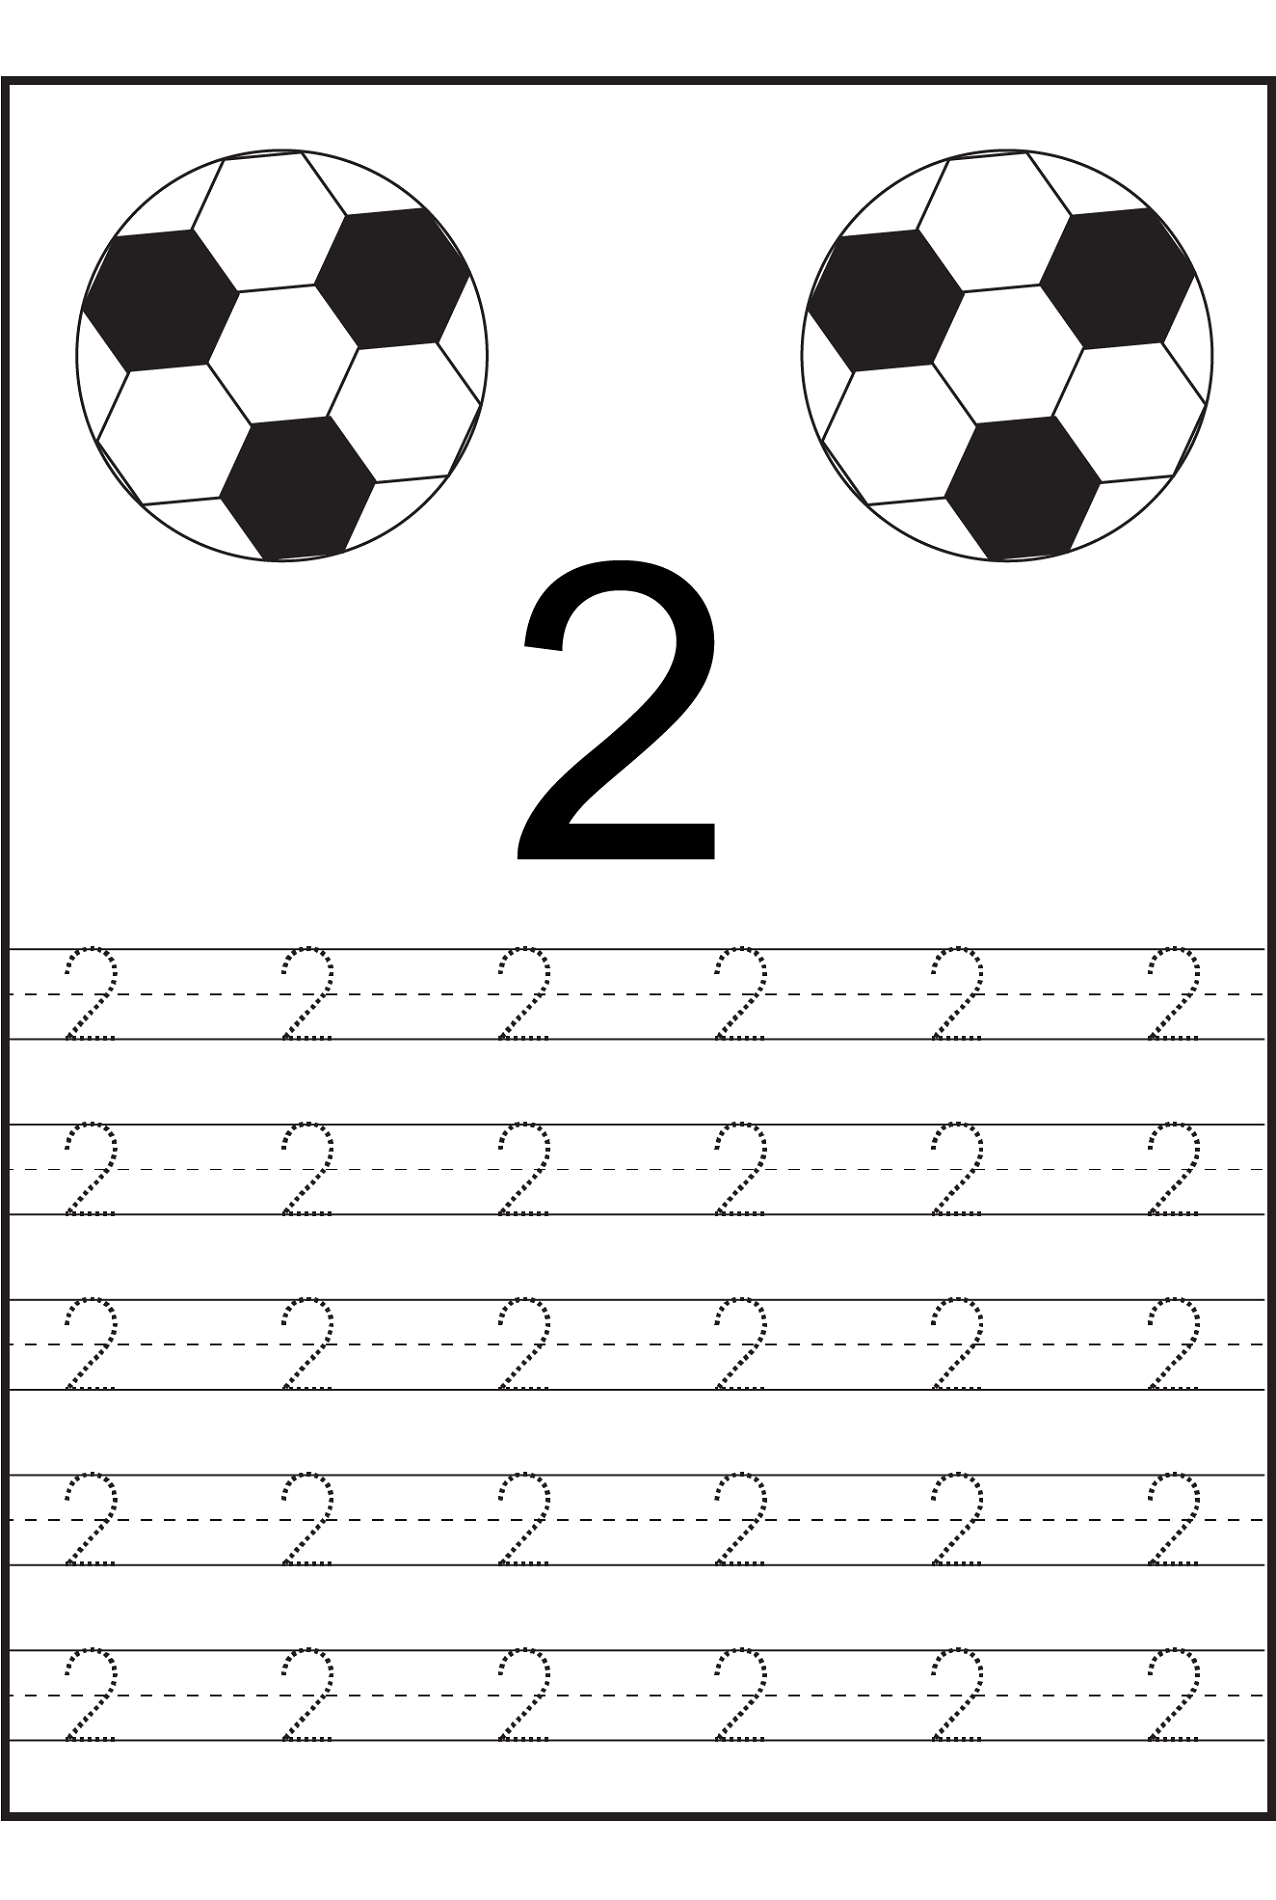 trace number 2 ball